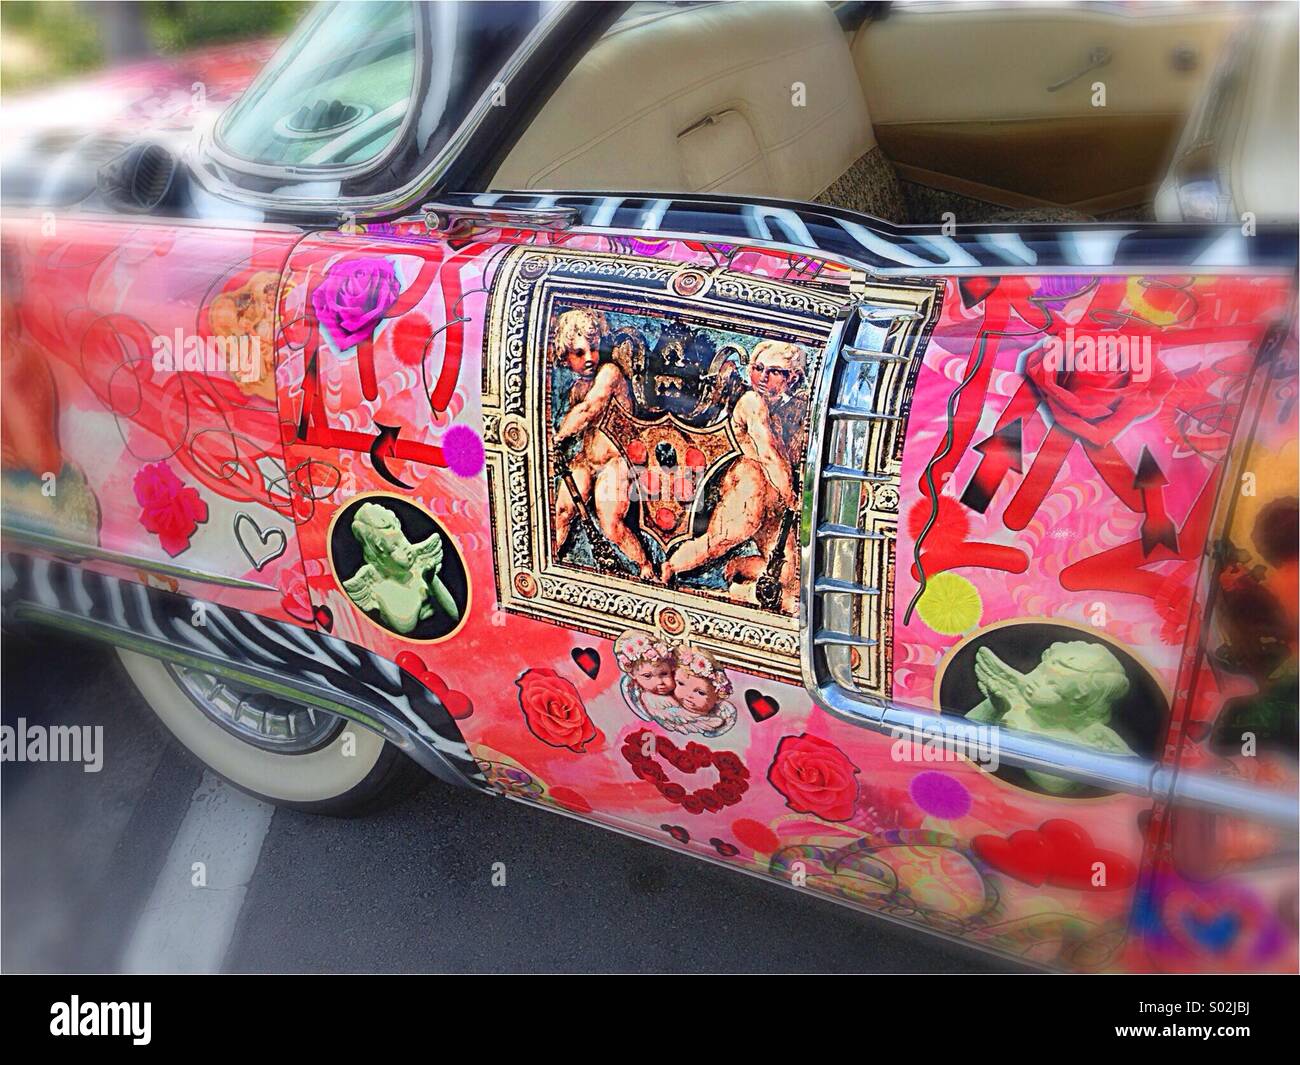 Love car. Detail of romantic paint job on sedan at public car show. Artwork features cuspids and other love symbols. Stock Photo